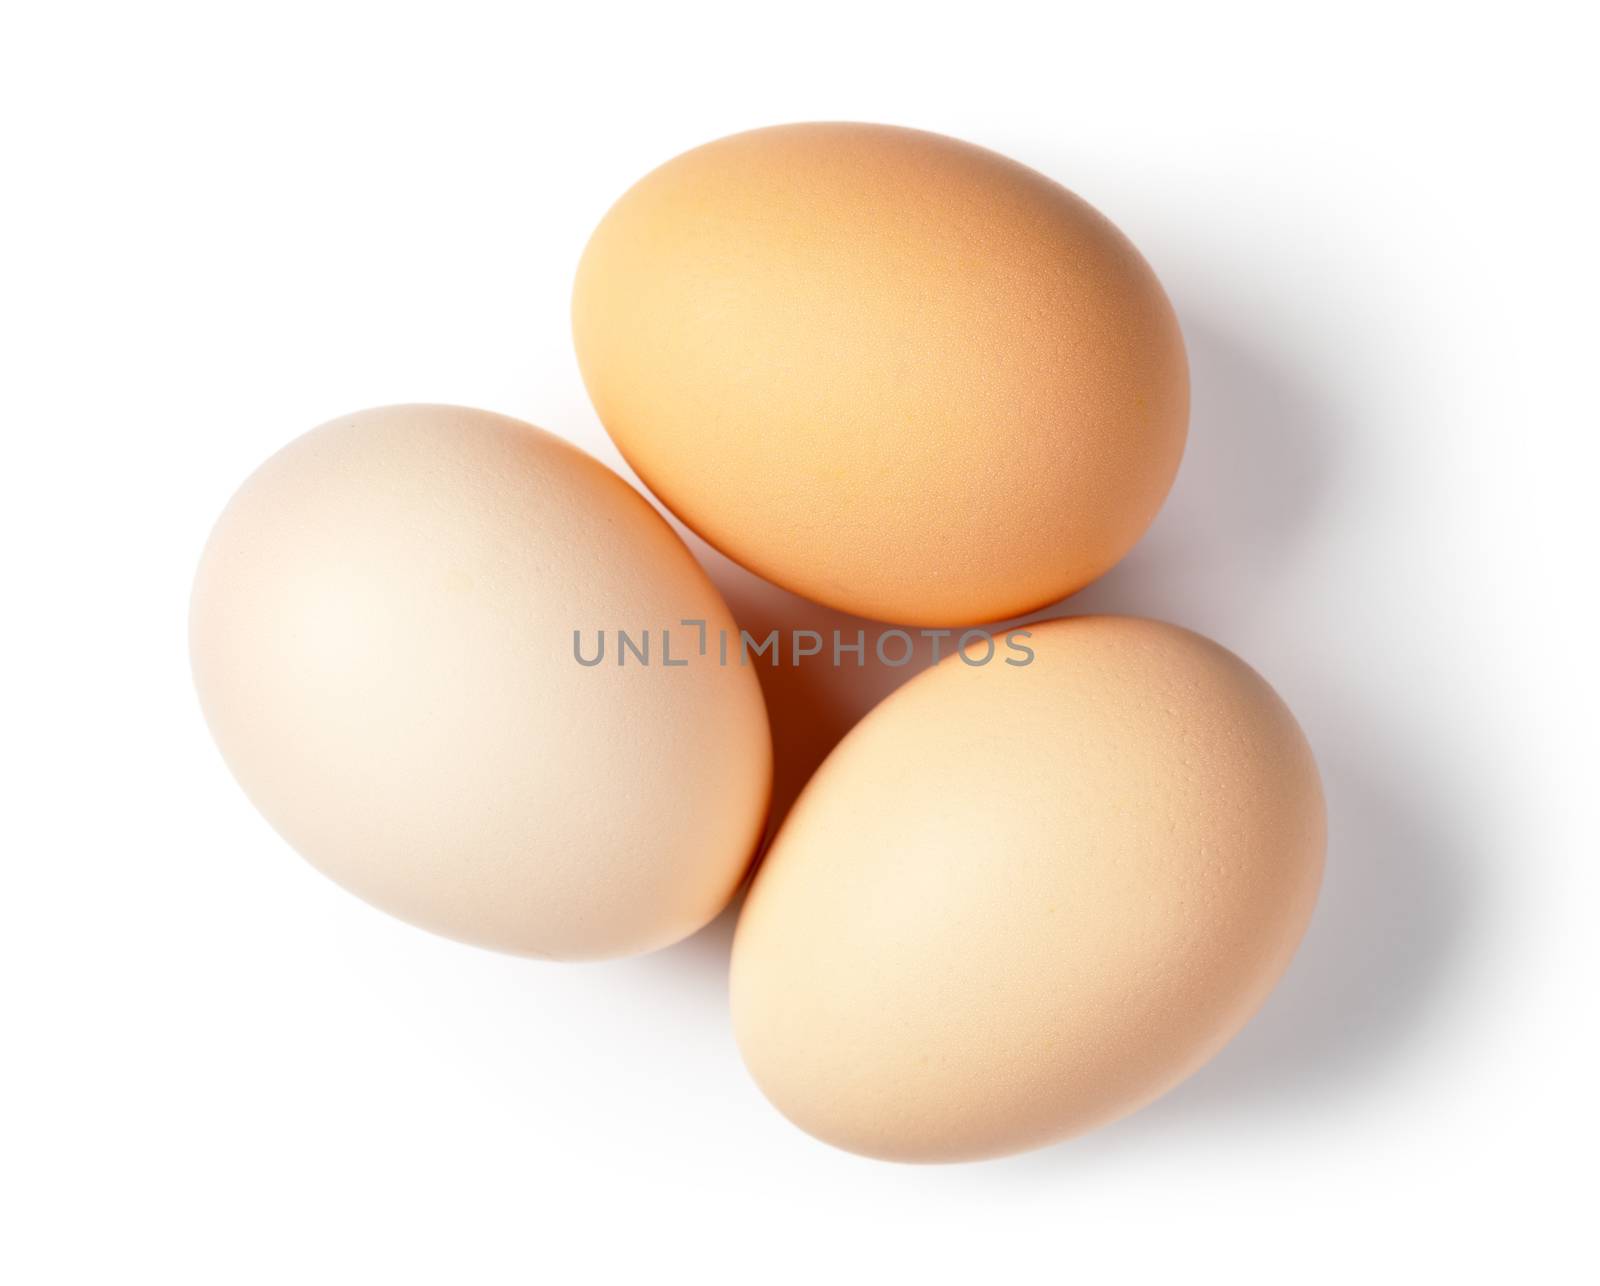 Three eggs on white background. Top view